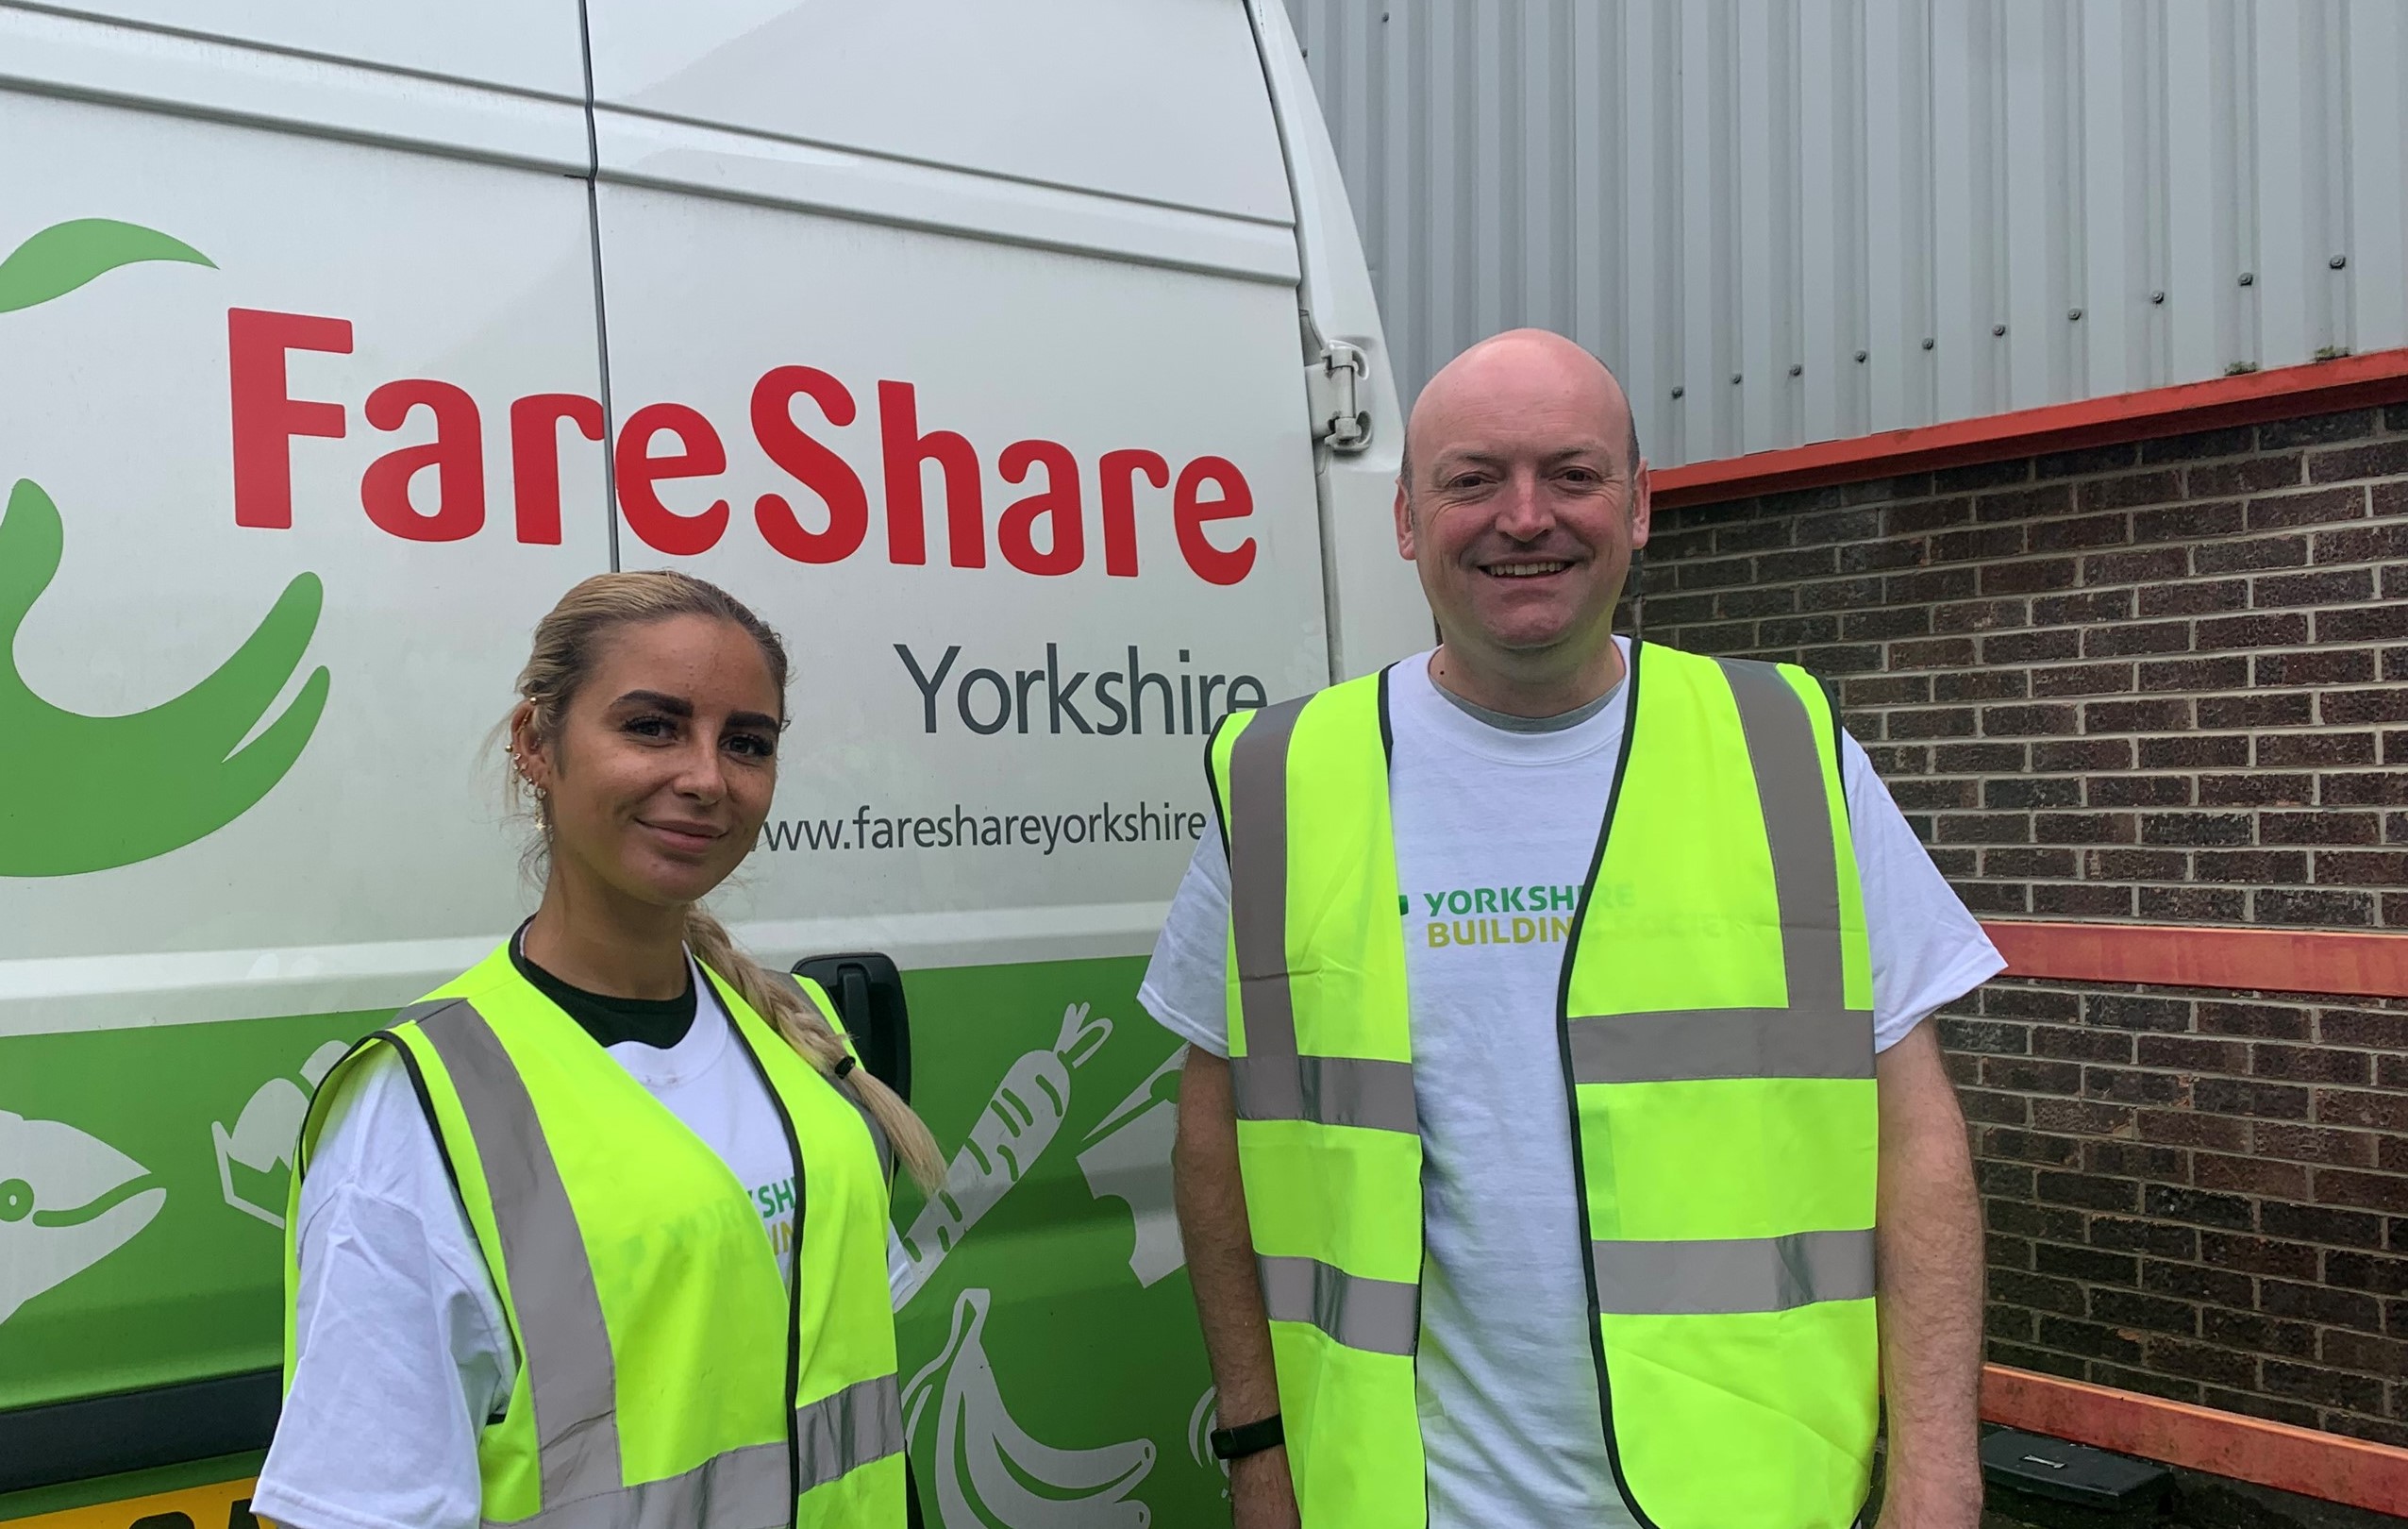 Colleagues from Yorkshire Building Society volunteer at FareShare's regional hub in Barnsley